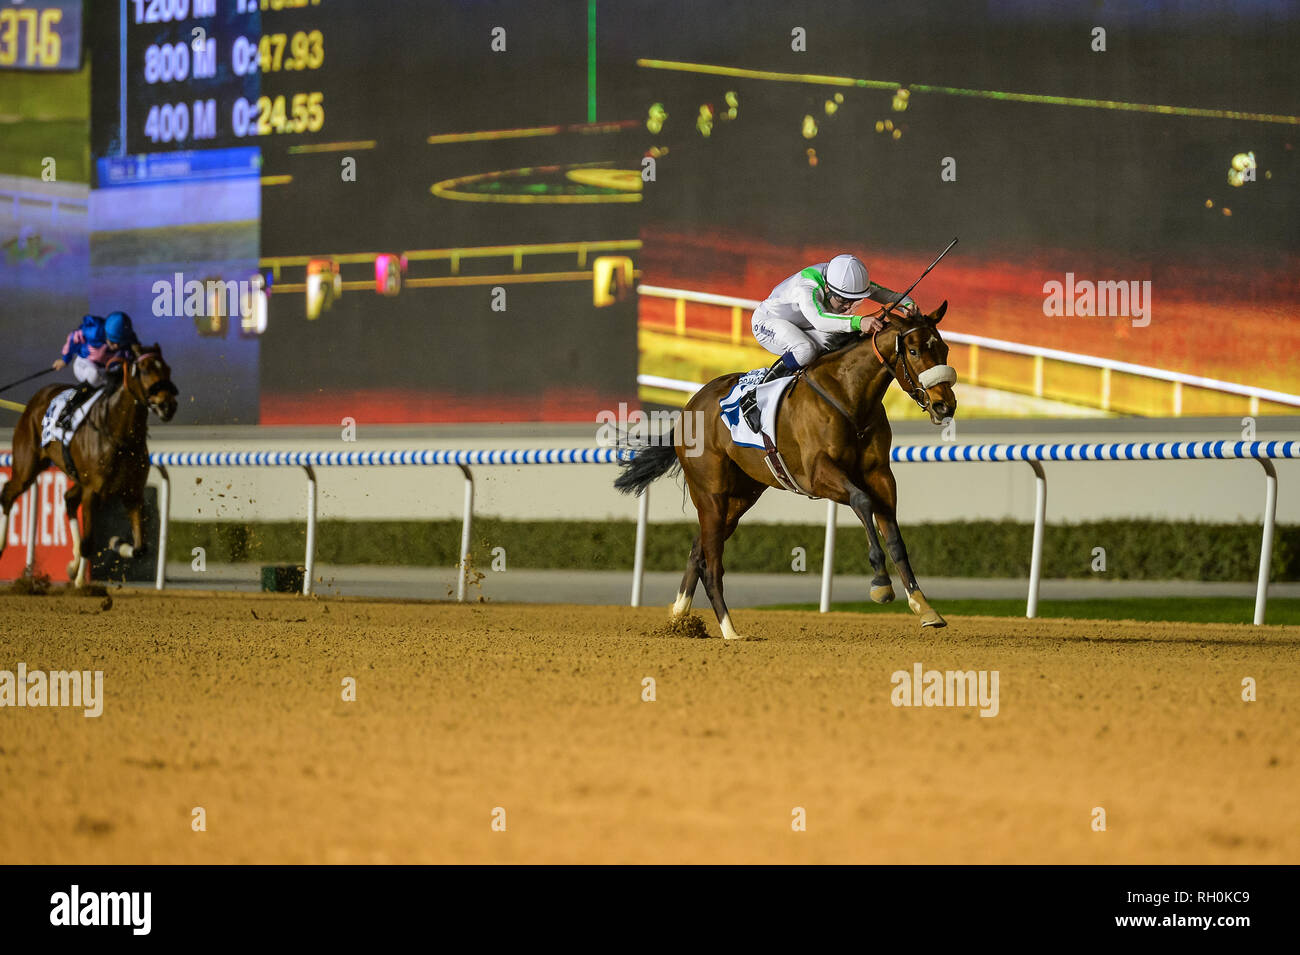 Dubai, UAE. 31st January 2019. Silva (IRE)  ridden by Oisin Murphy wins the UAE 1000 Guineas sponsored by DP World UAE Region during the 5th meet of the Dubai Racing Carnical 2019 at Meydan. The horse is trained by Pia Brandt and owned by Zalim Bifov Credit: Feroz Khan/Alamy Live News Stock Photo